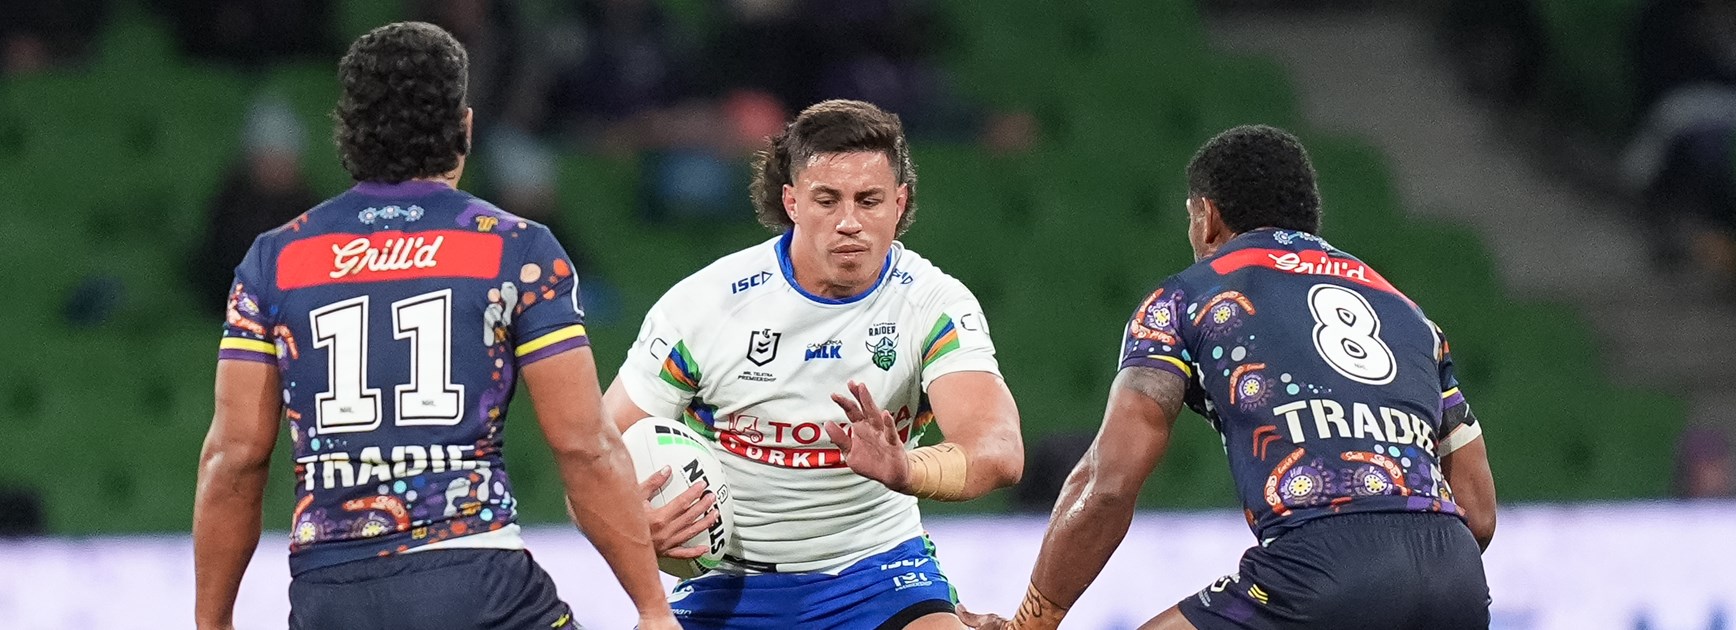 Raiders go down to Storm in Melbourne